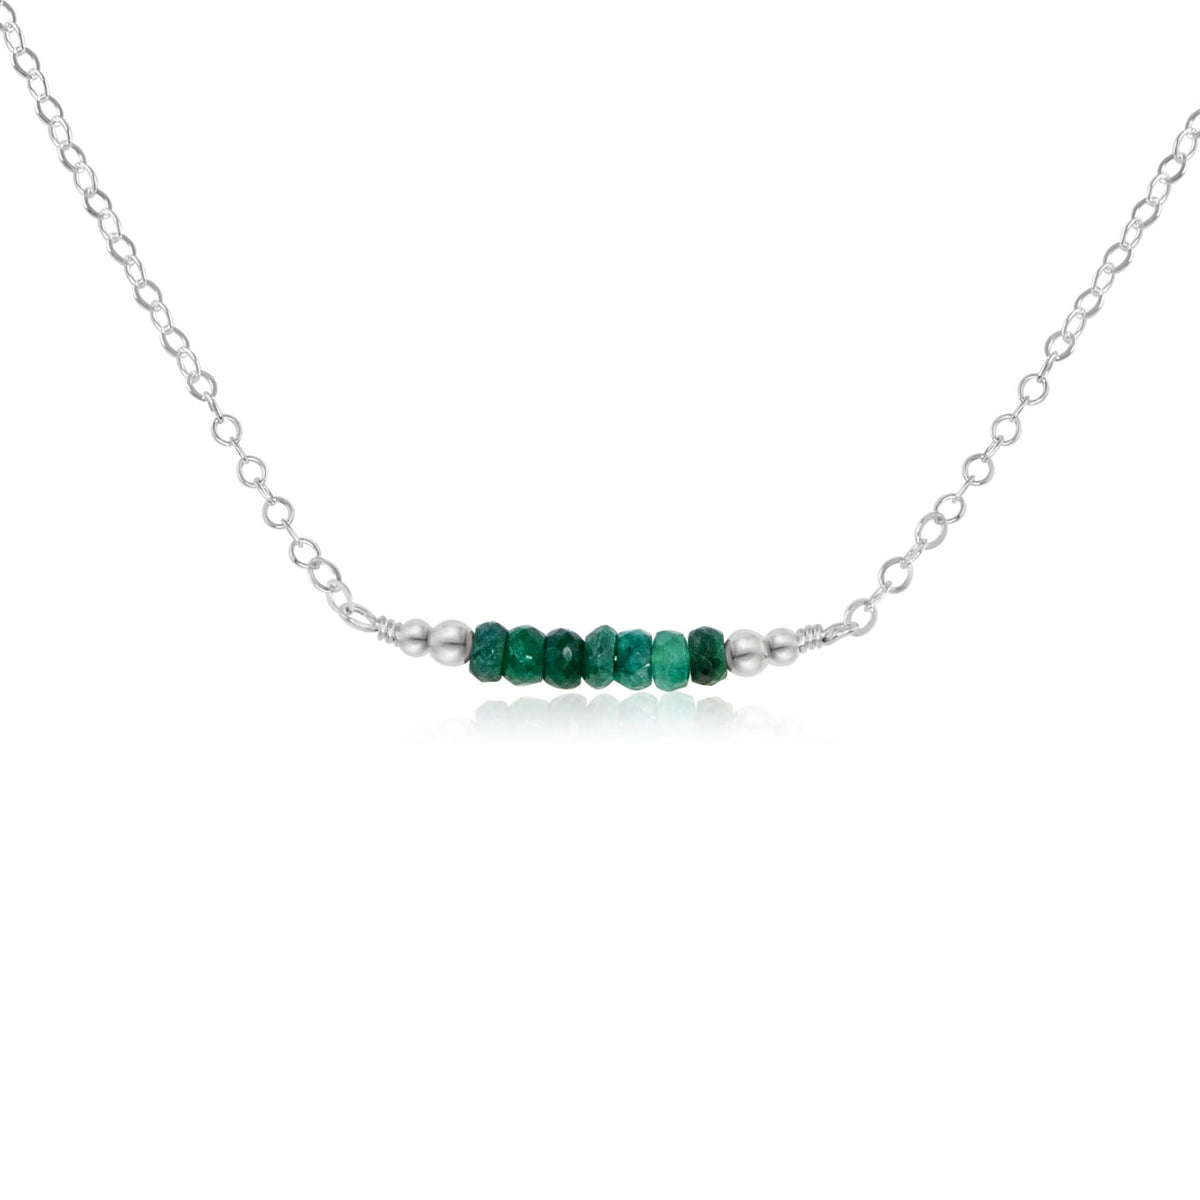 Faceted Bead Bar Necklace - Emerald - Sterling Silver - Luna Tide Handmade Jewellery